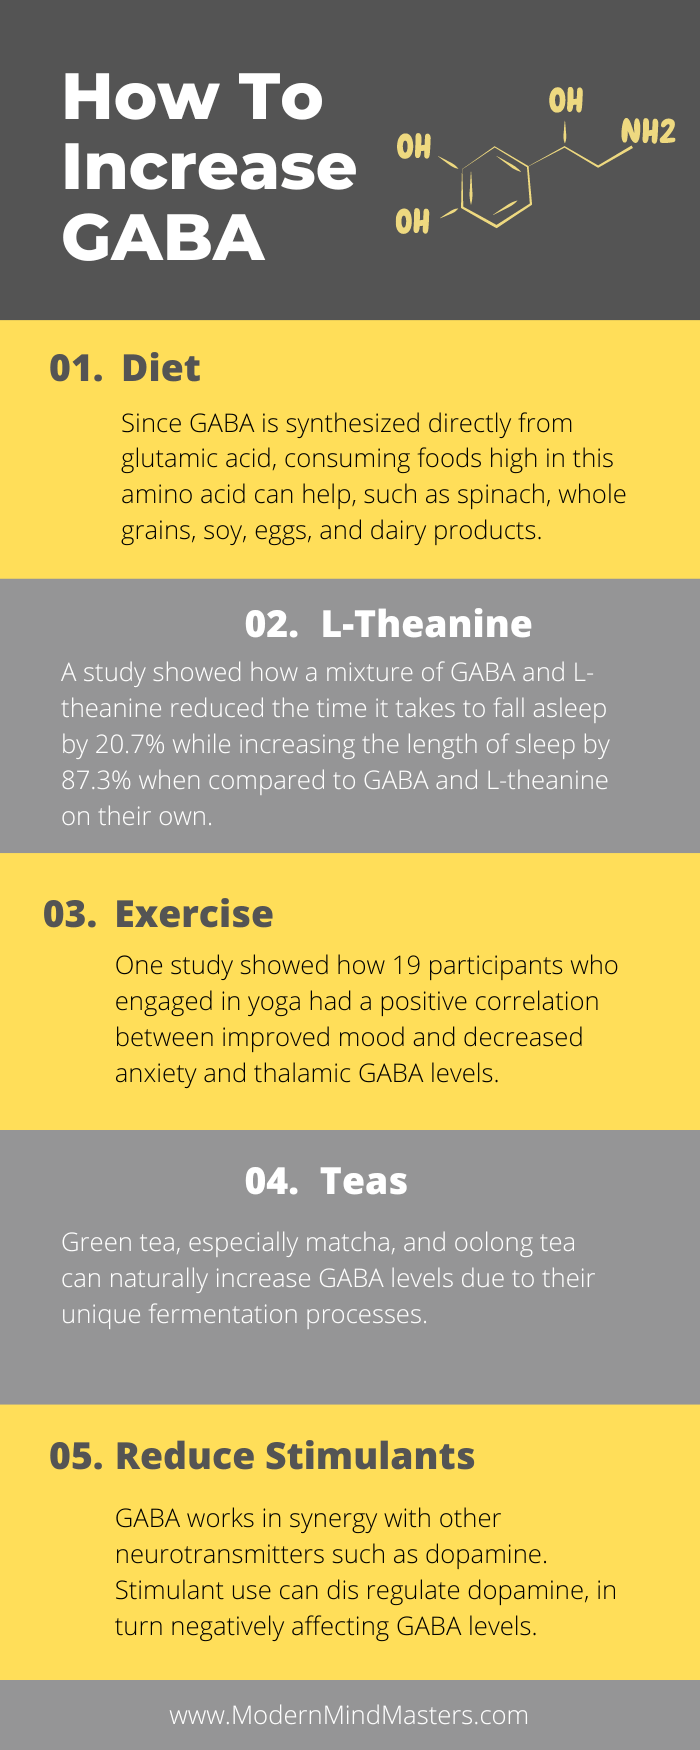 Diet, L-theanine, exercise, teas, and reducing stimulants can increase GABA.